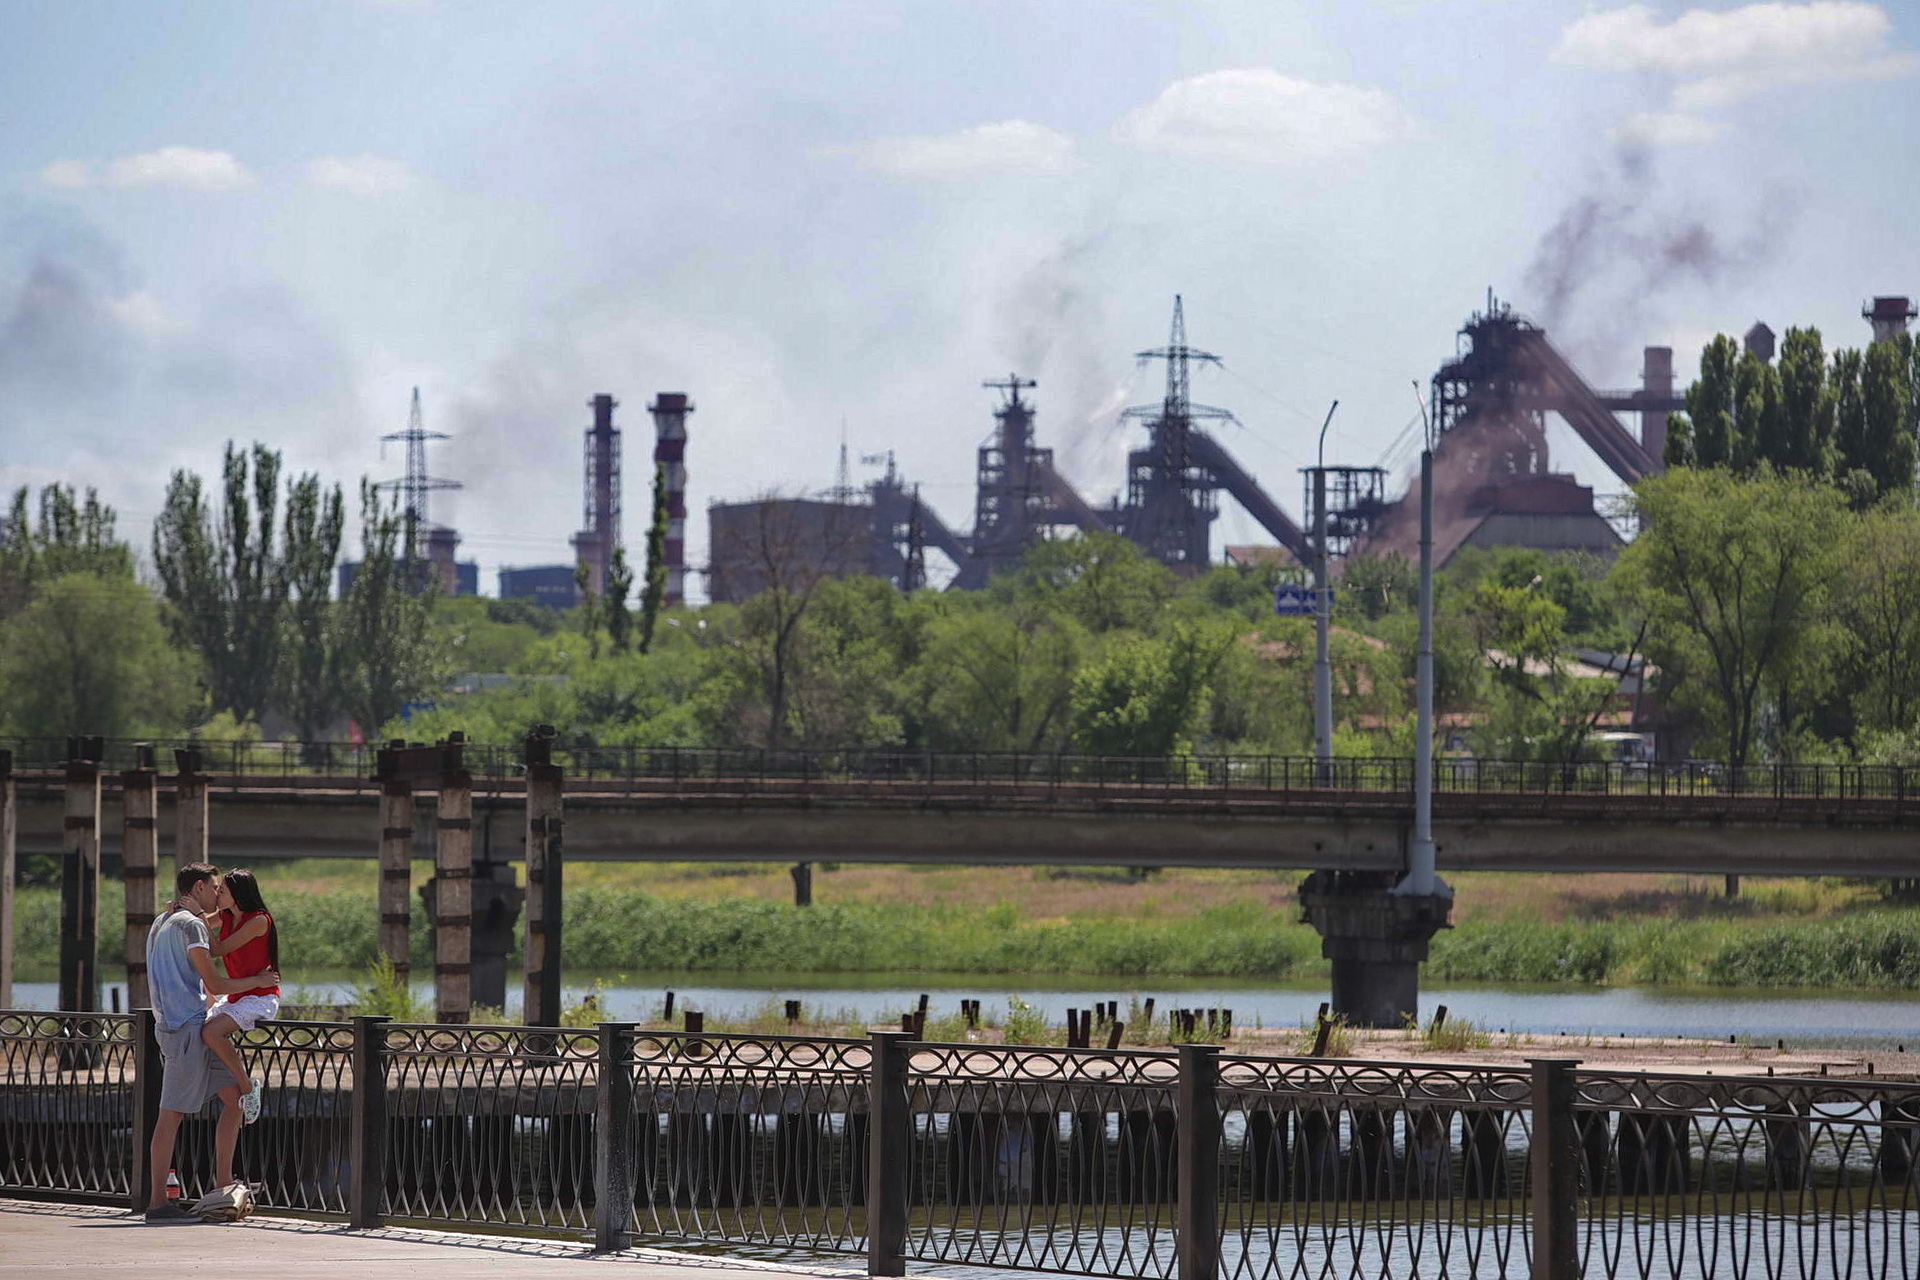 A view of the ArcelorMittal Kryvyi Rih blast furnaces on June 7, 2018.